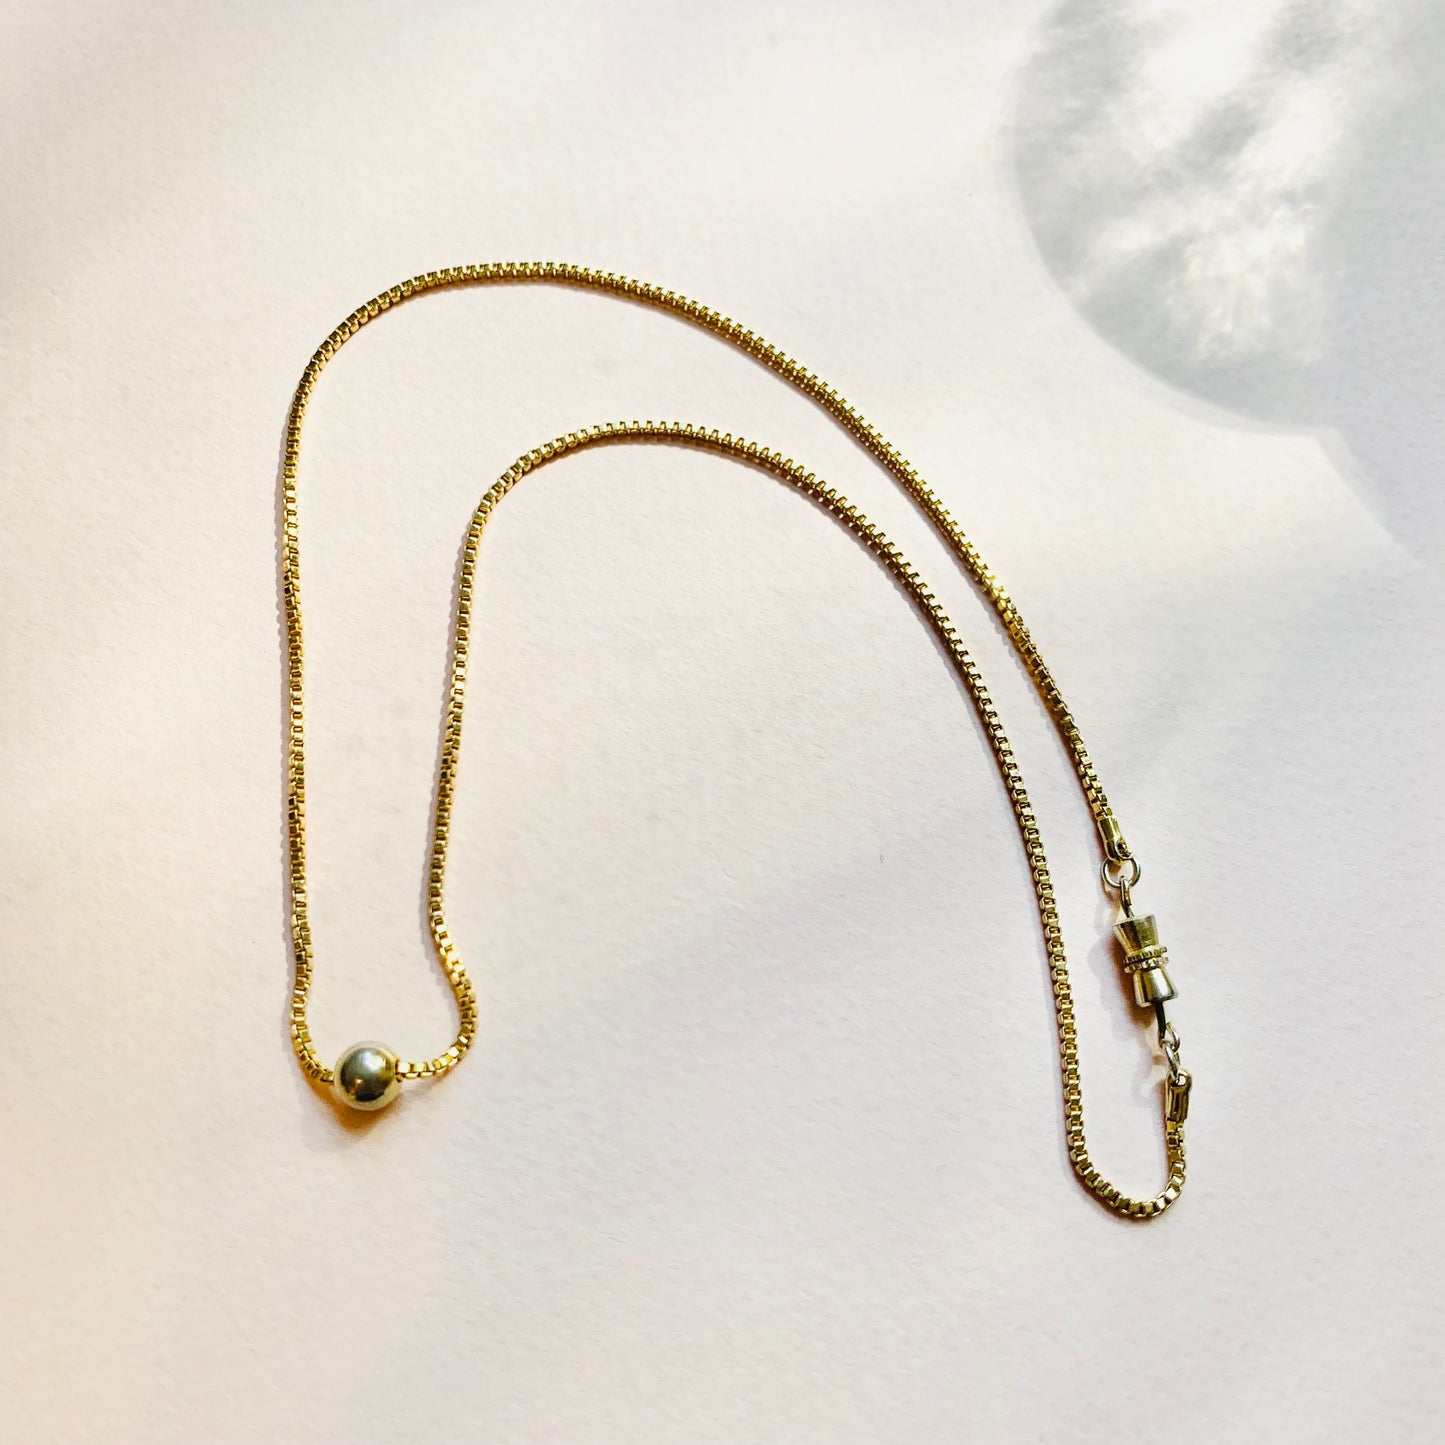 1970s Anson American triple plated gold necklace with ball pendant